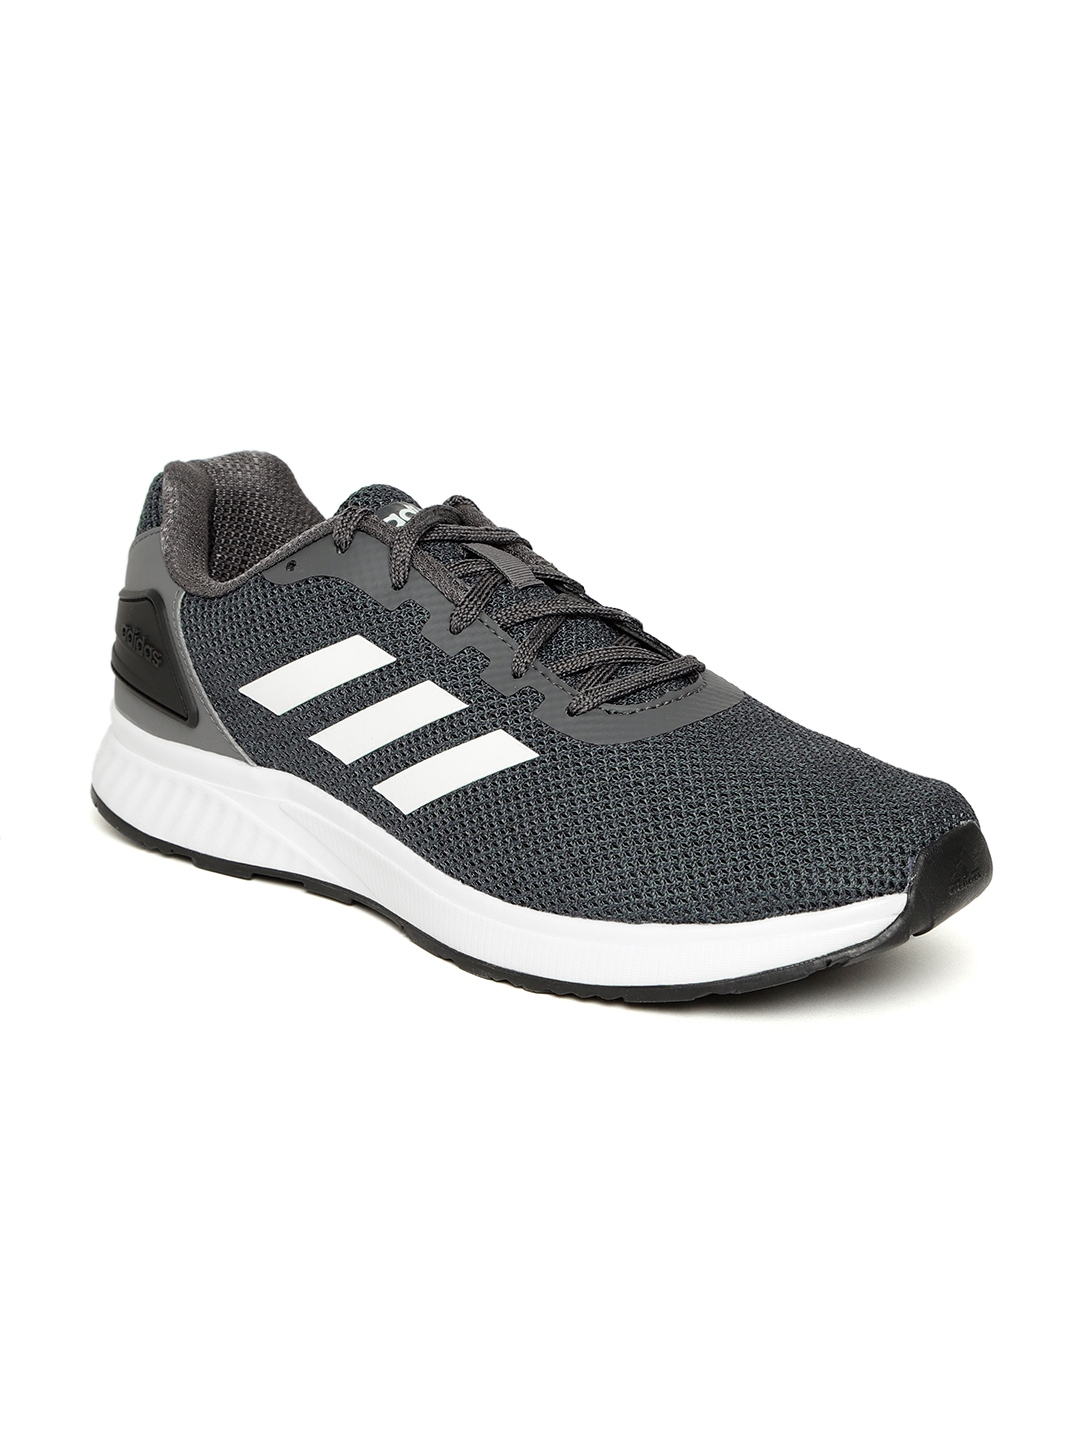 Buy ADIDAS Men Charcoal Running Shoes - Sports Shoes for Men 6842194 ...